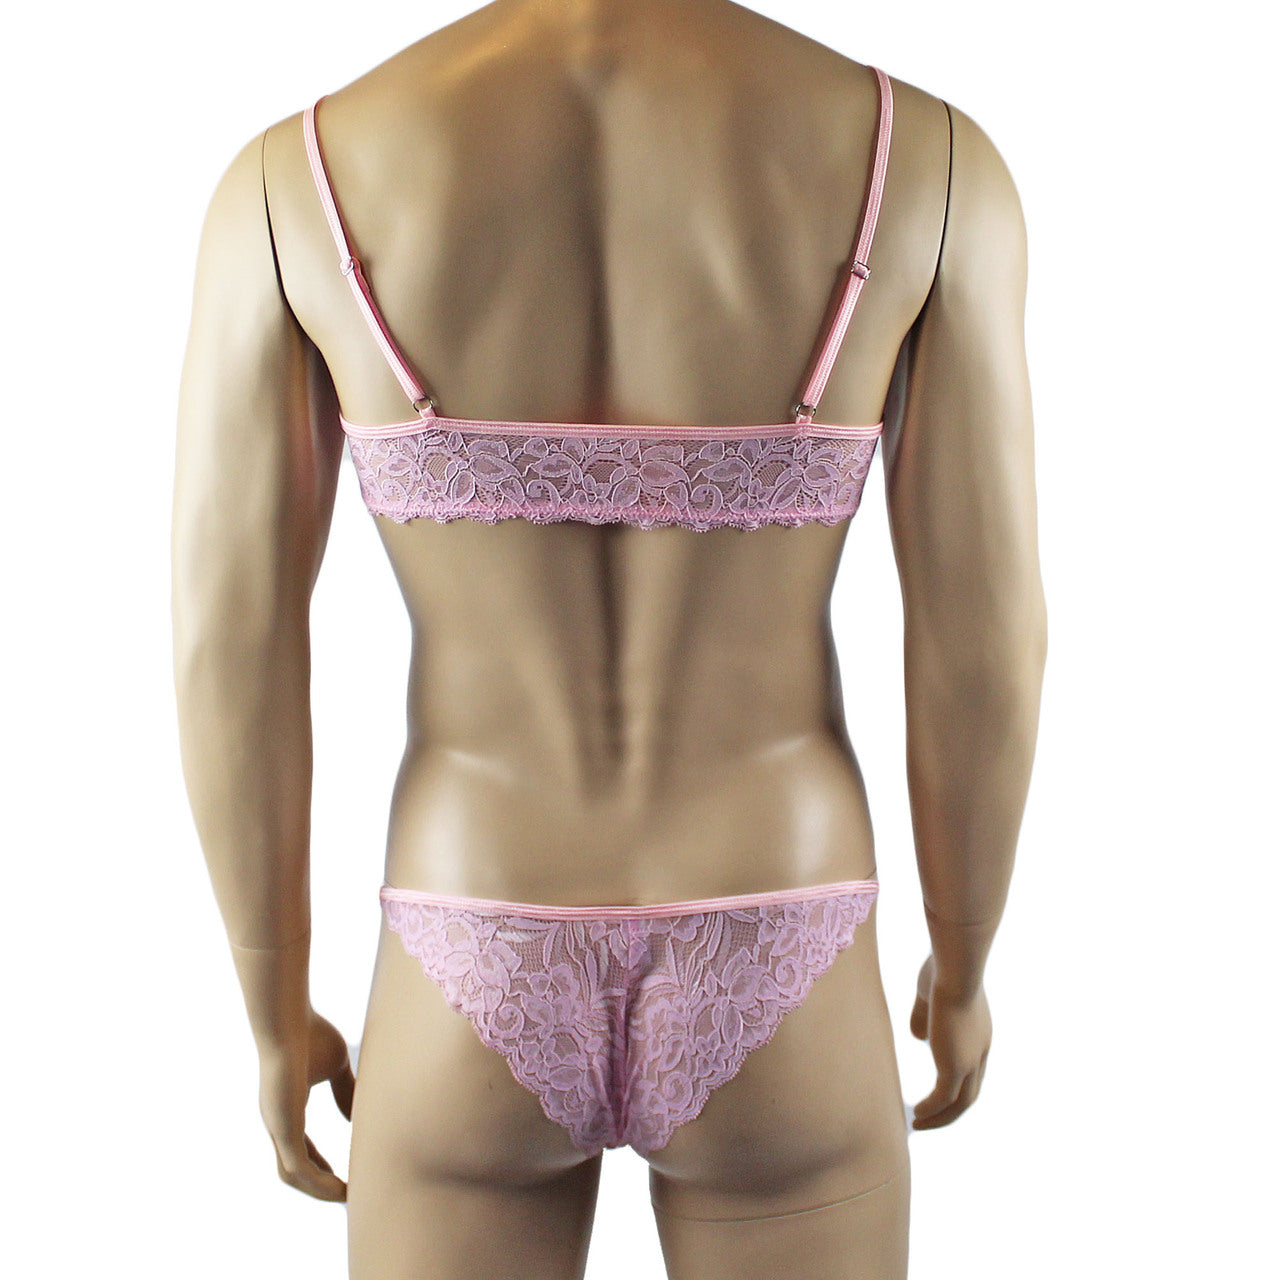 Mens Sexy Lace Bikini Brief, Male Panties (light pink plus other colours)